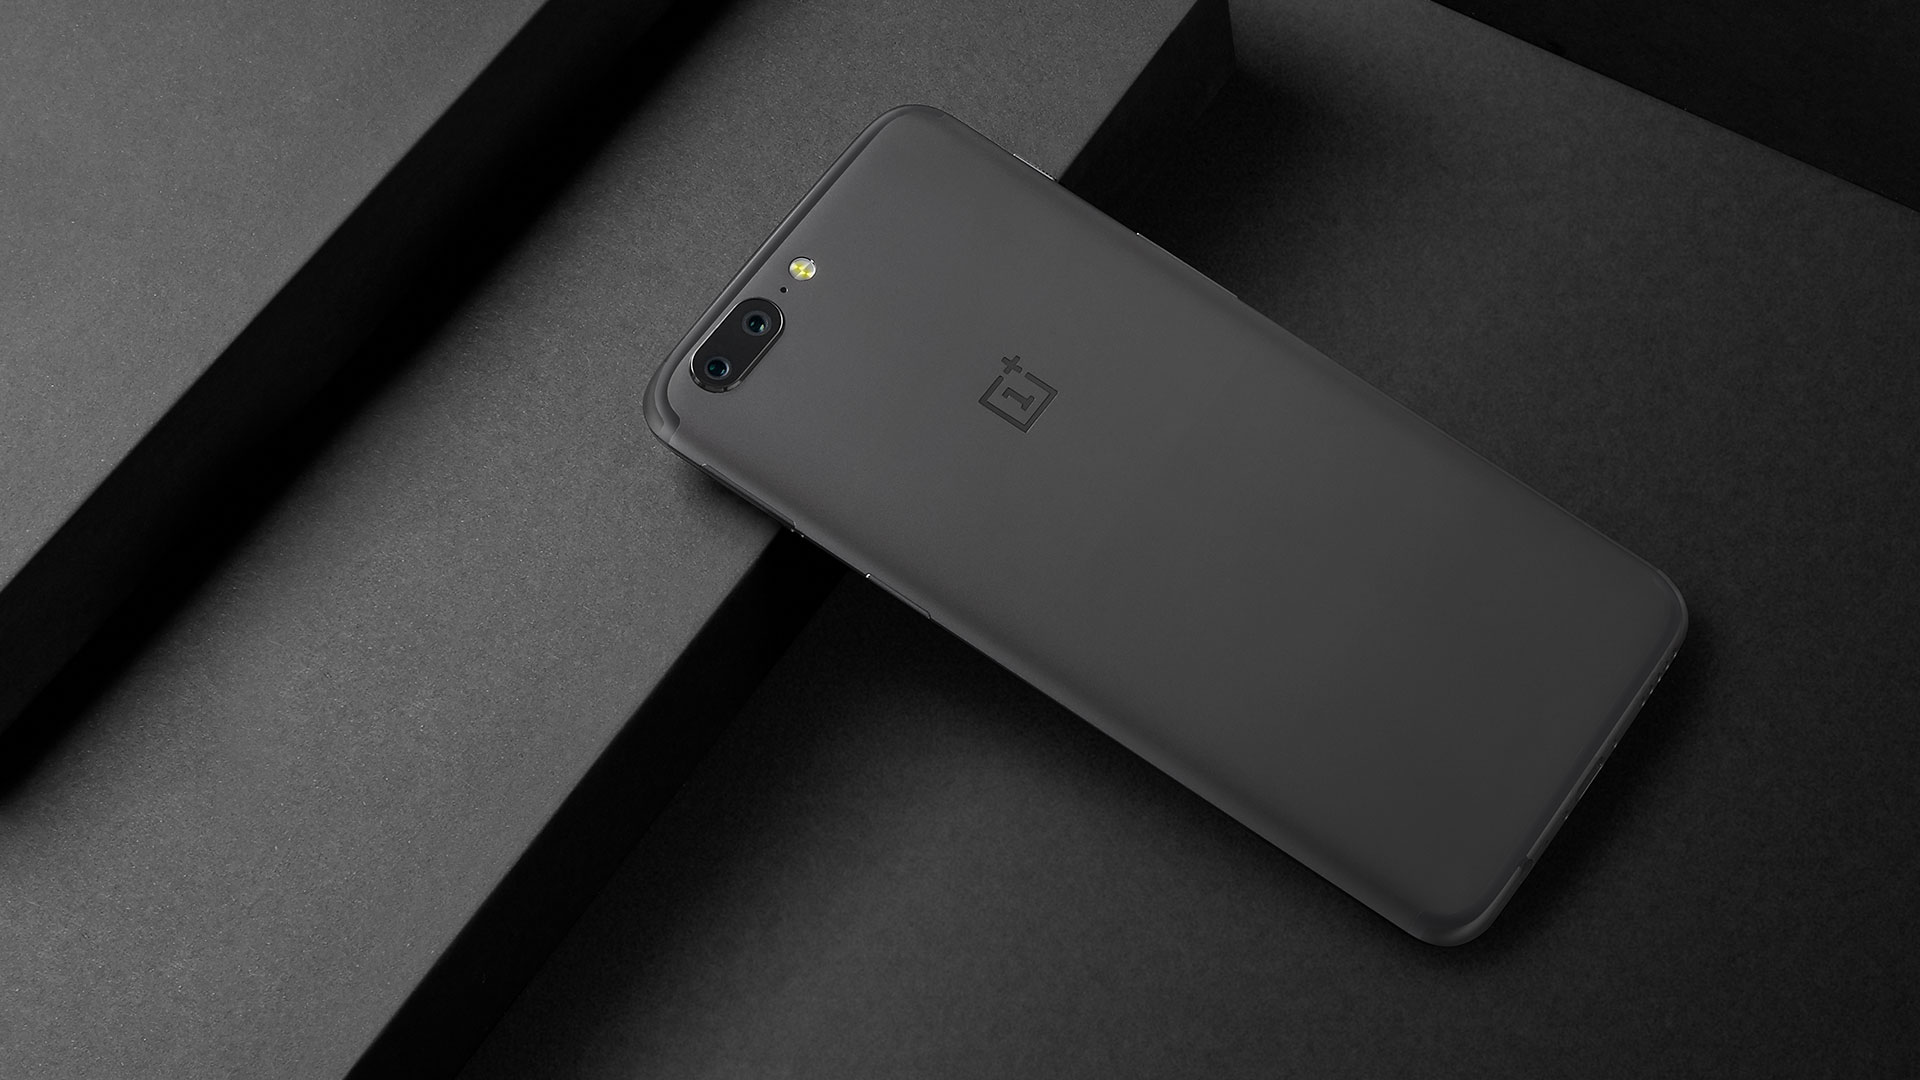 OnePlus 5 To Be Available in Malaysia Soon, Official Price Revealed